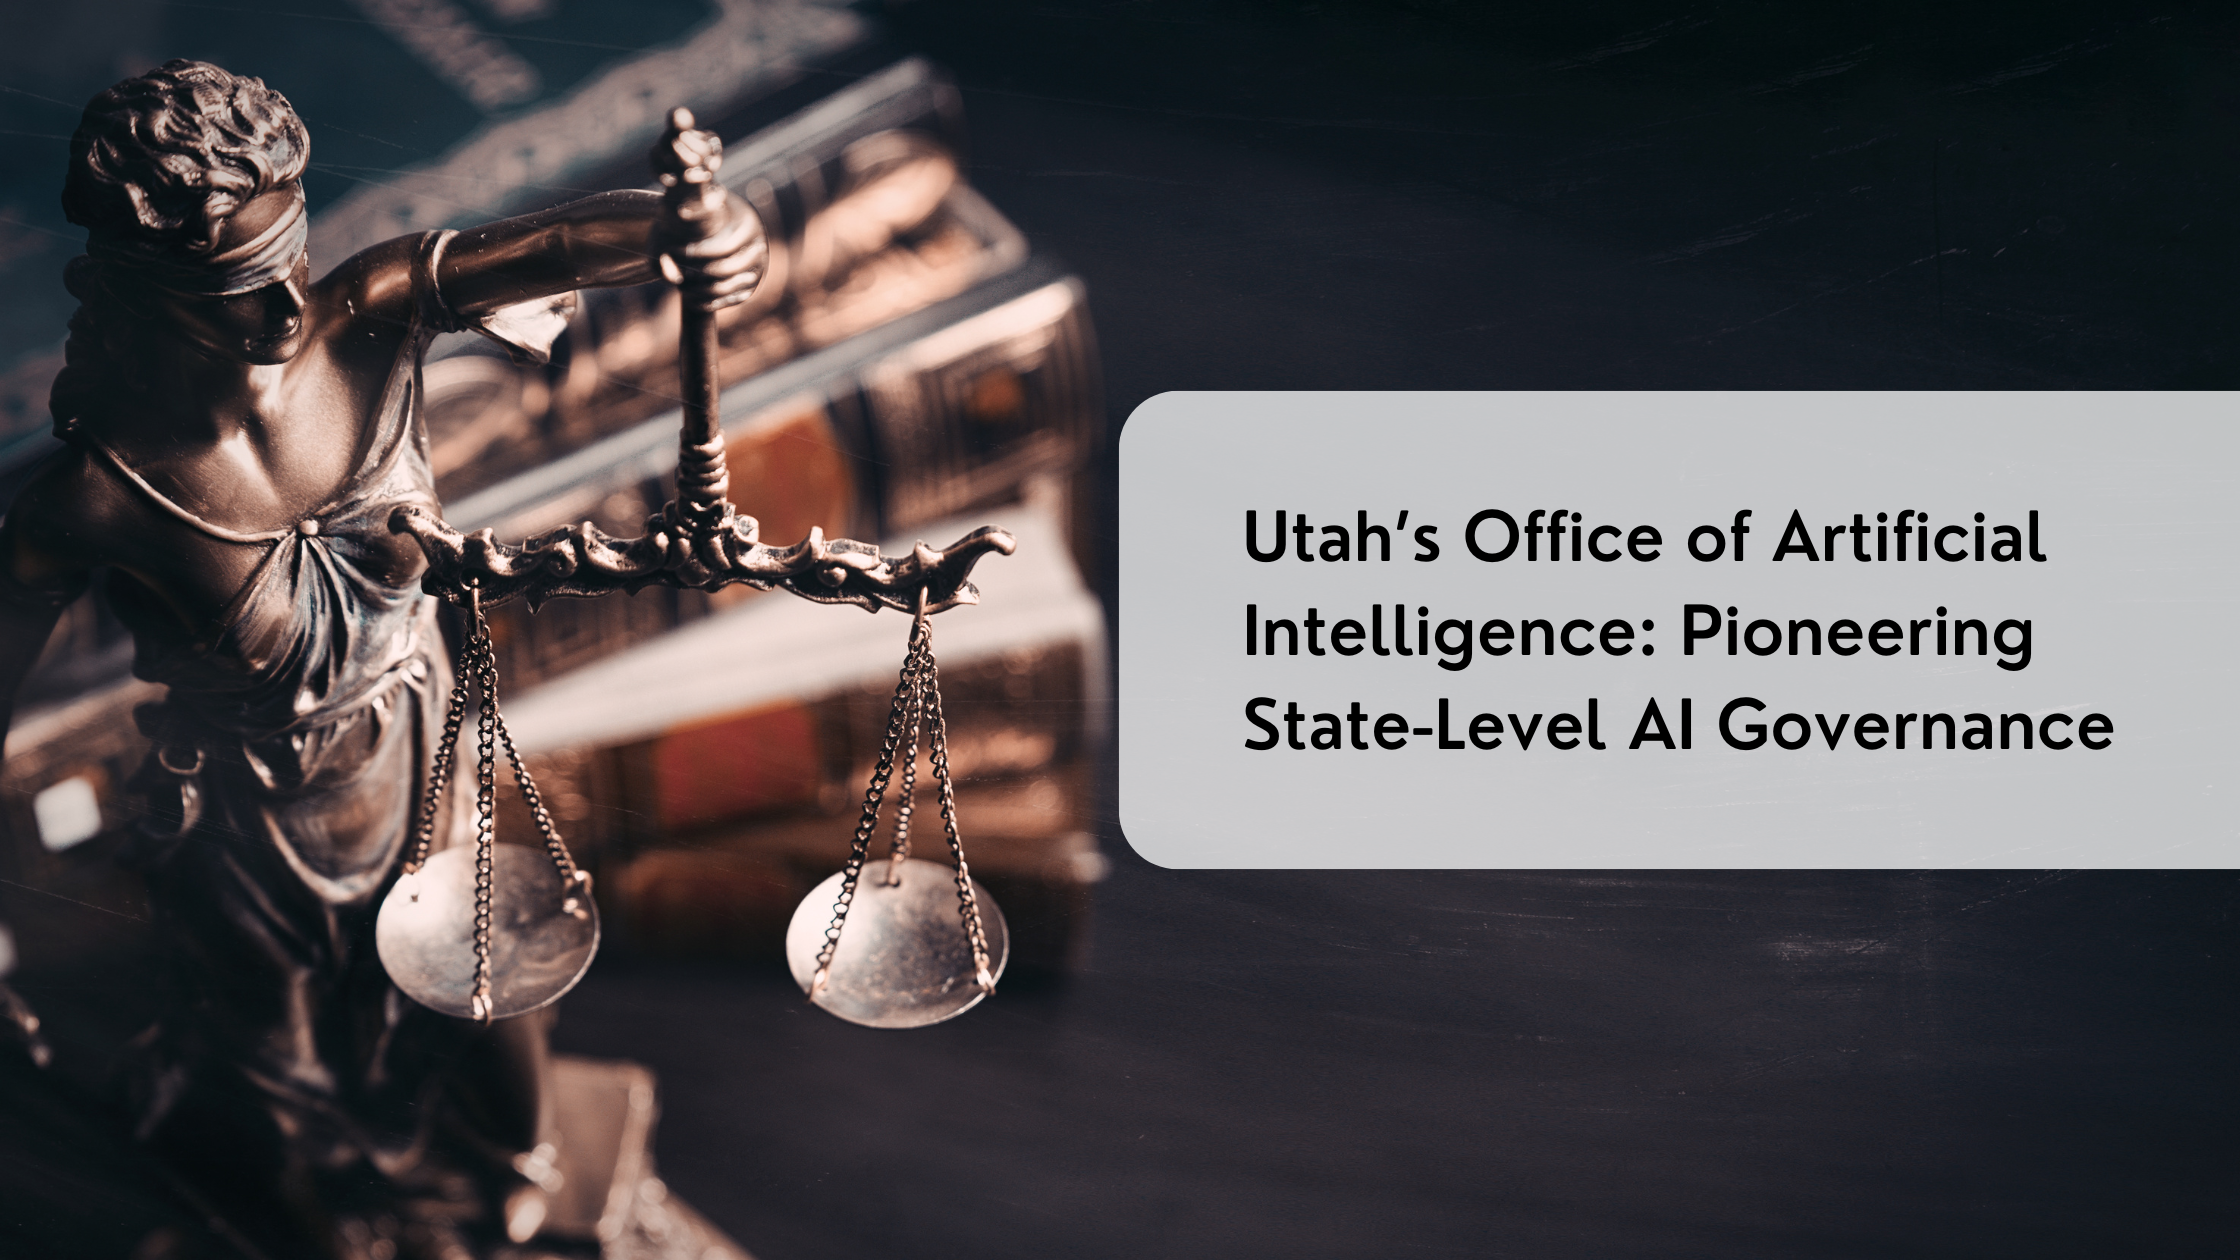 Utah’s Office of Artificial Intelligence: Pioneering State-Level AI Governance